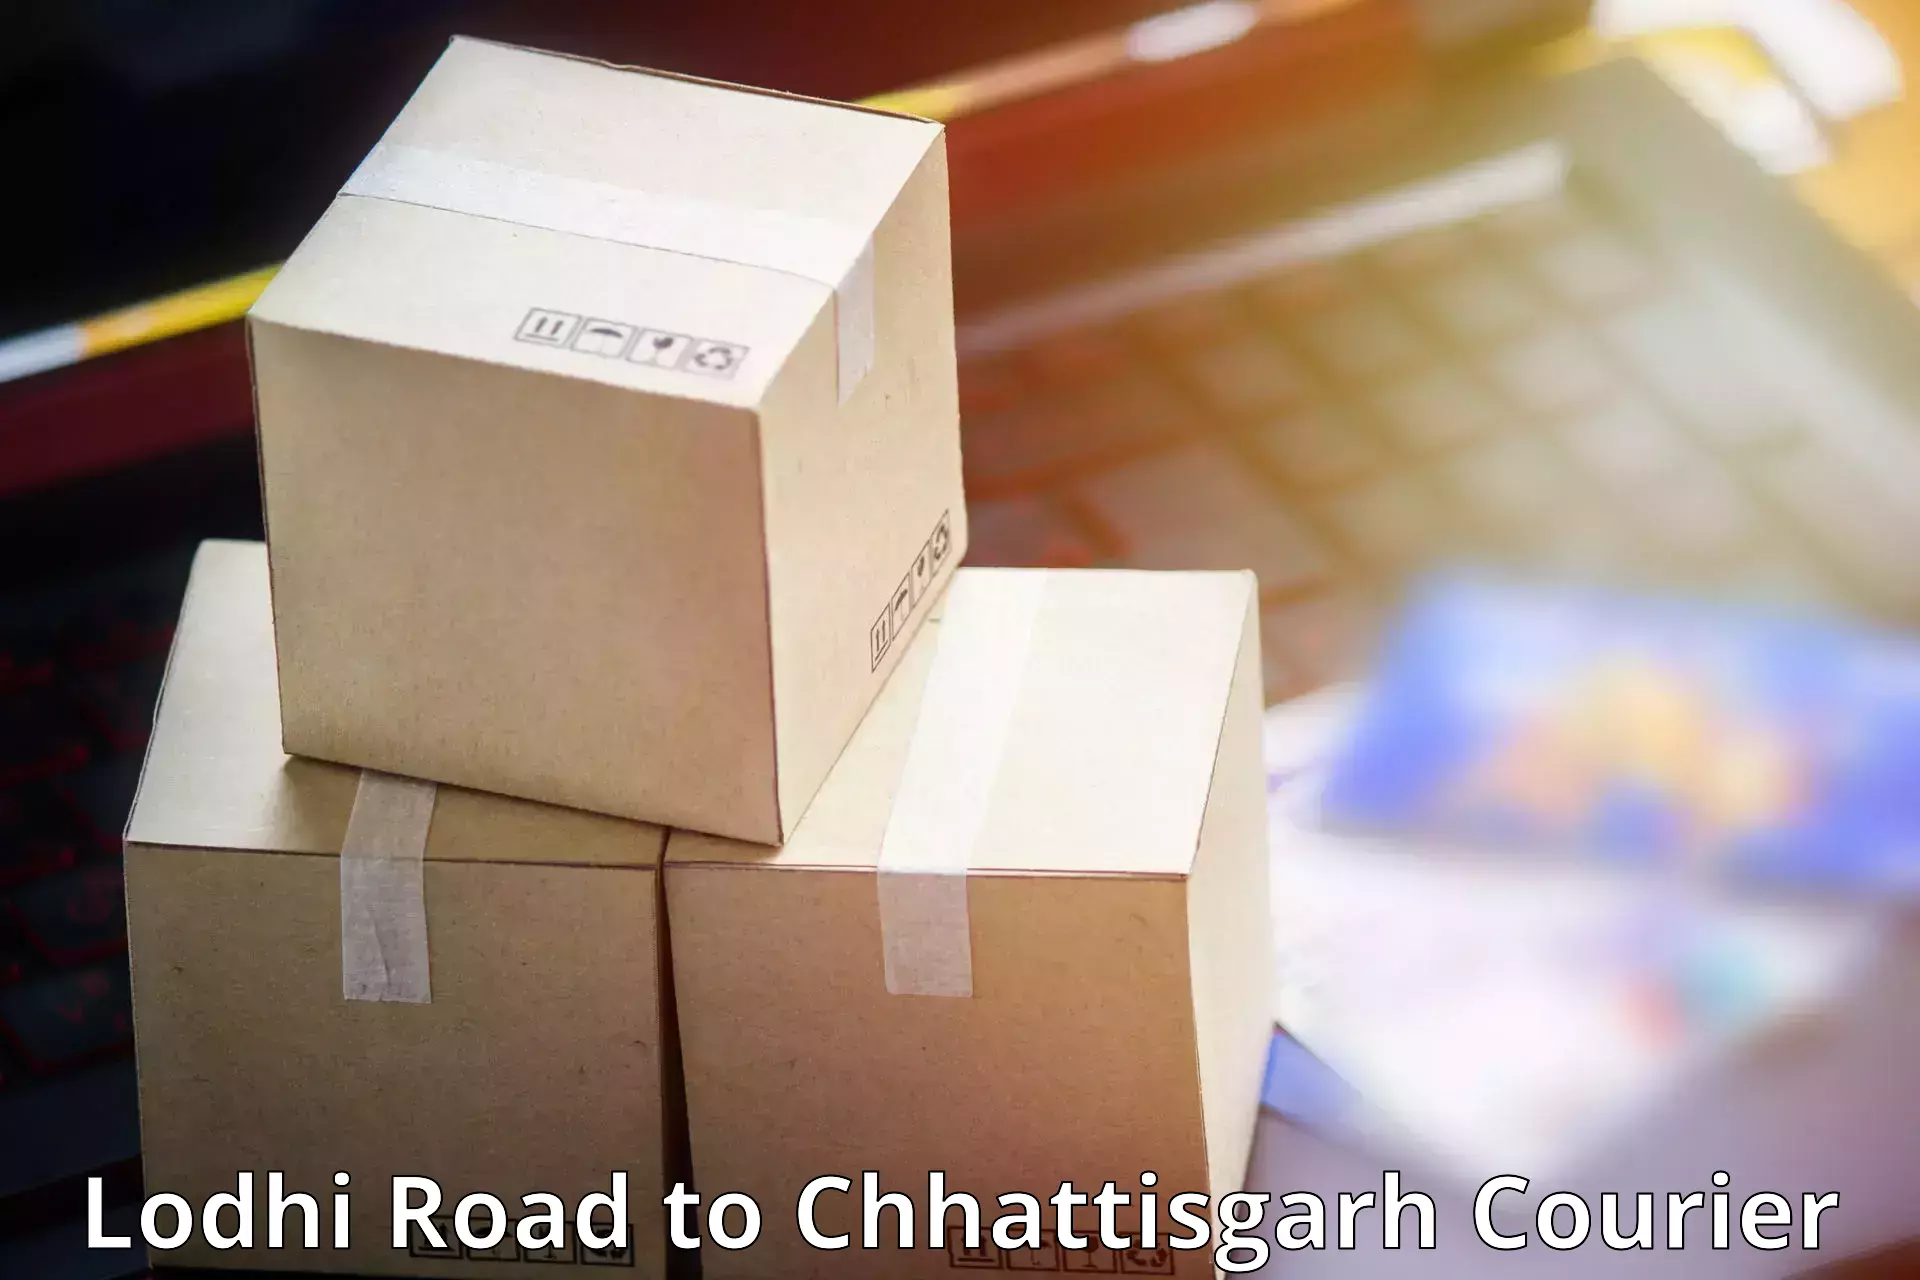 Courier service comparison Lodhi Road to Dharamjaigarh